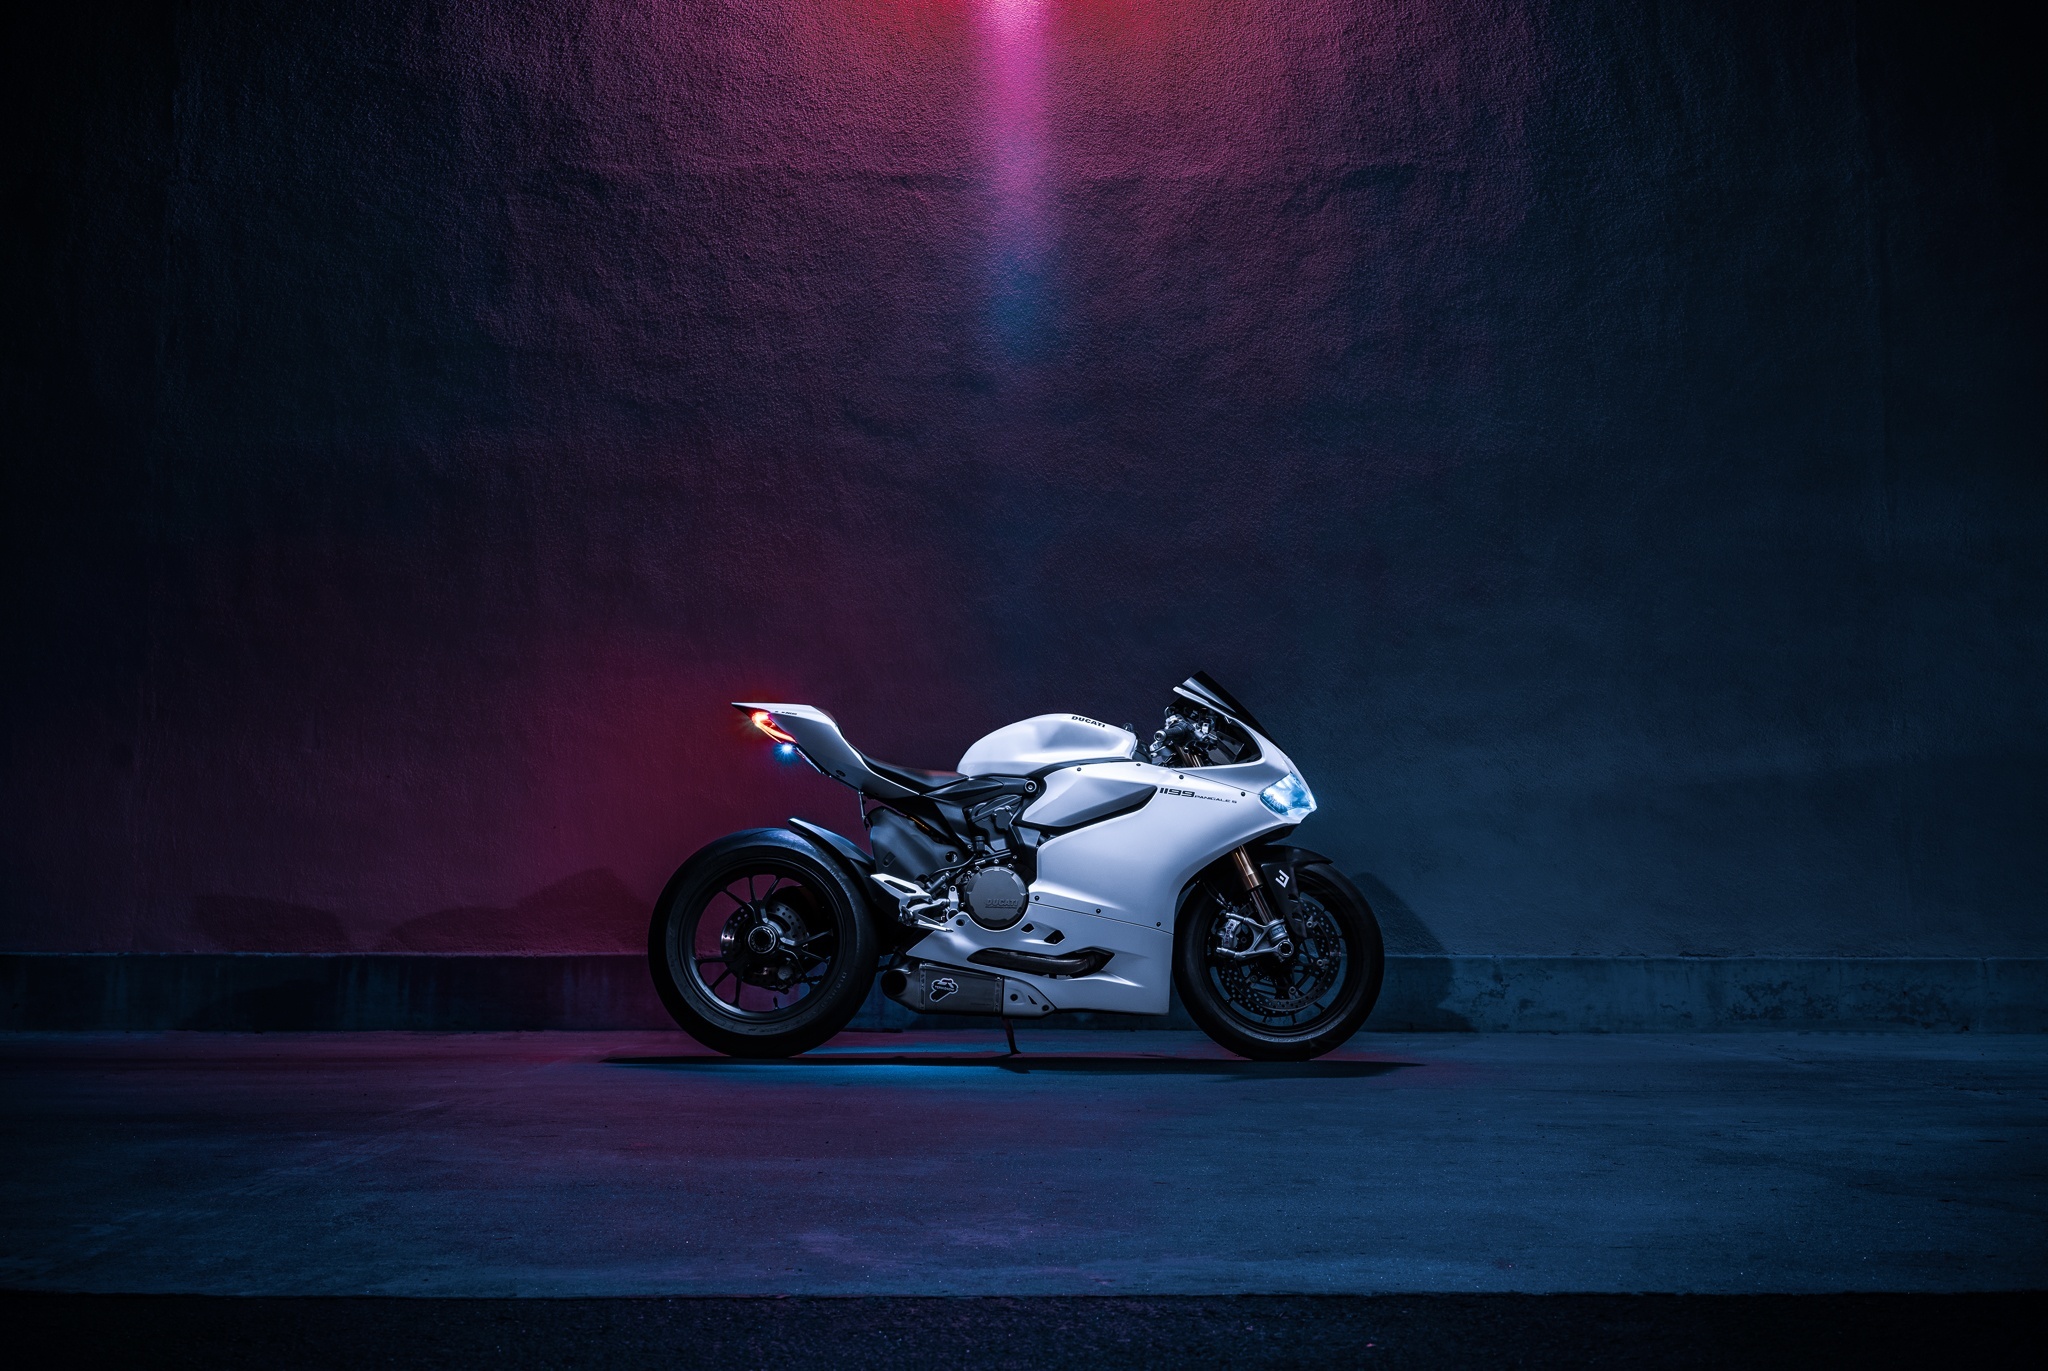 ducati, motorcycles, motorcycle, 1199s, panigale